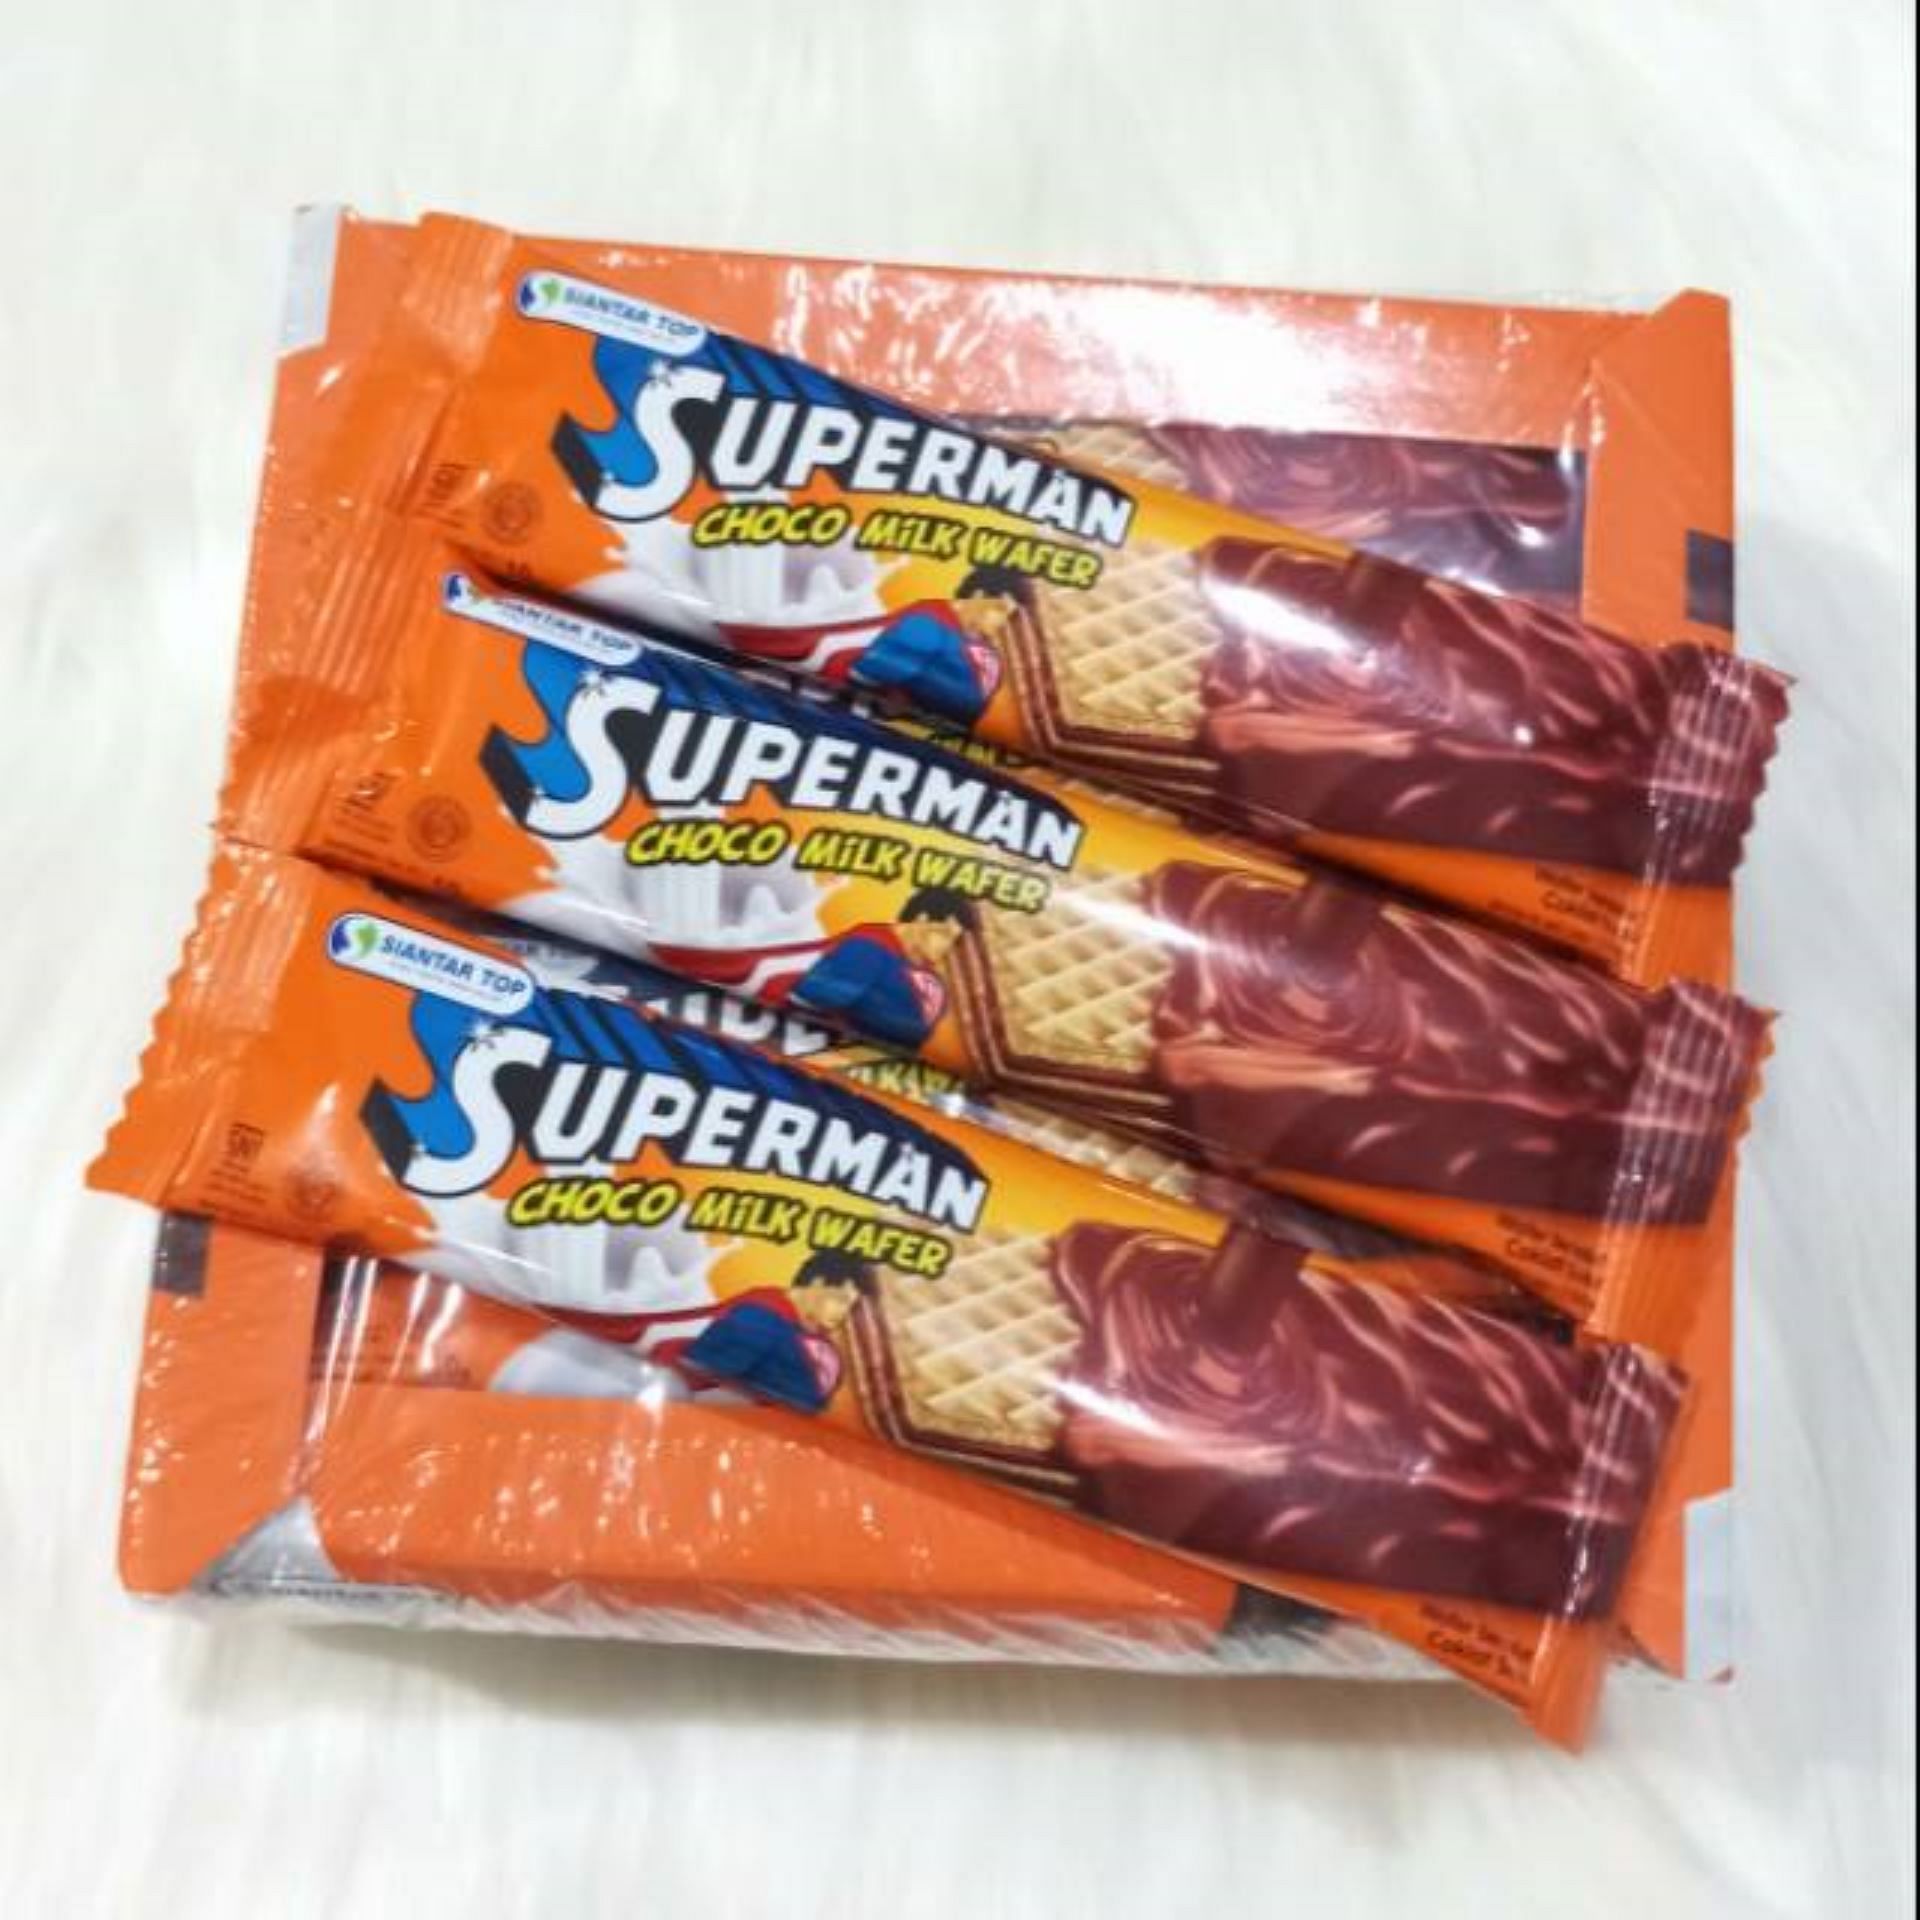 Marxing is an Indonesian brand that sold Superman themed snacks (Image via Marxing)